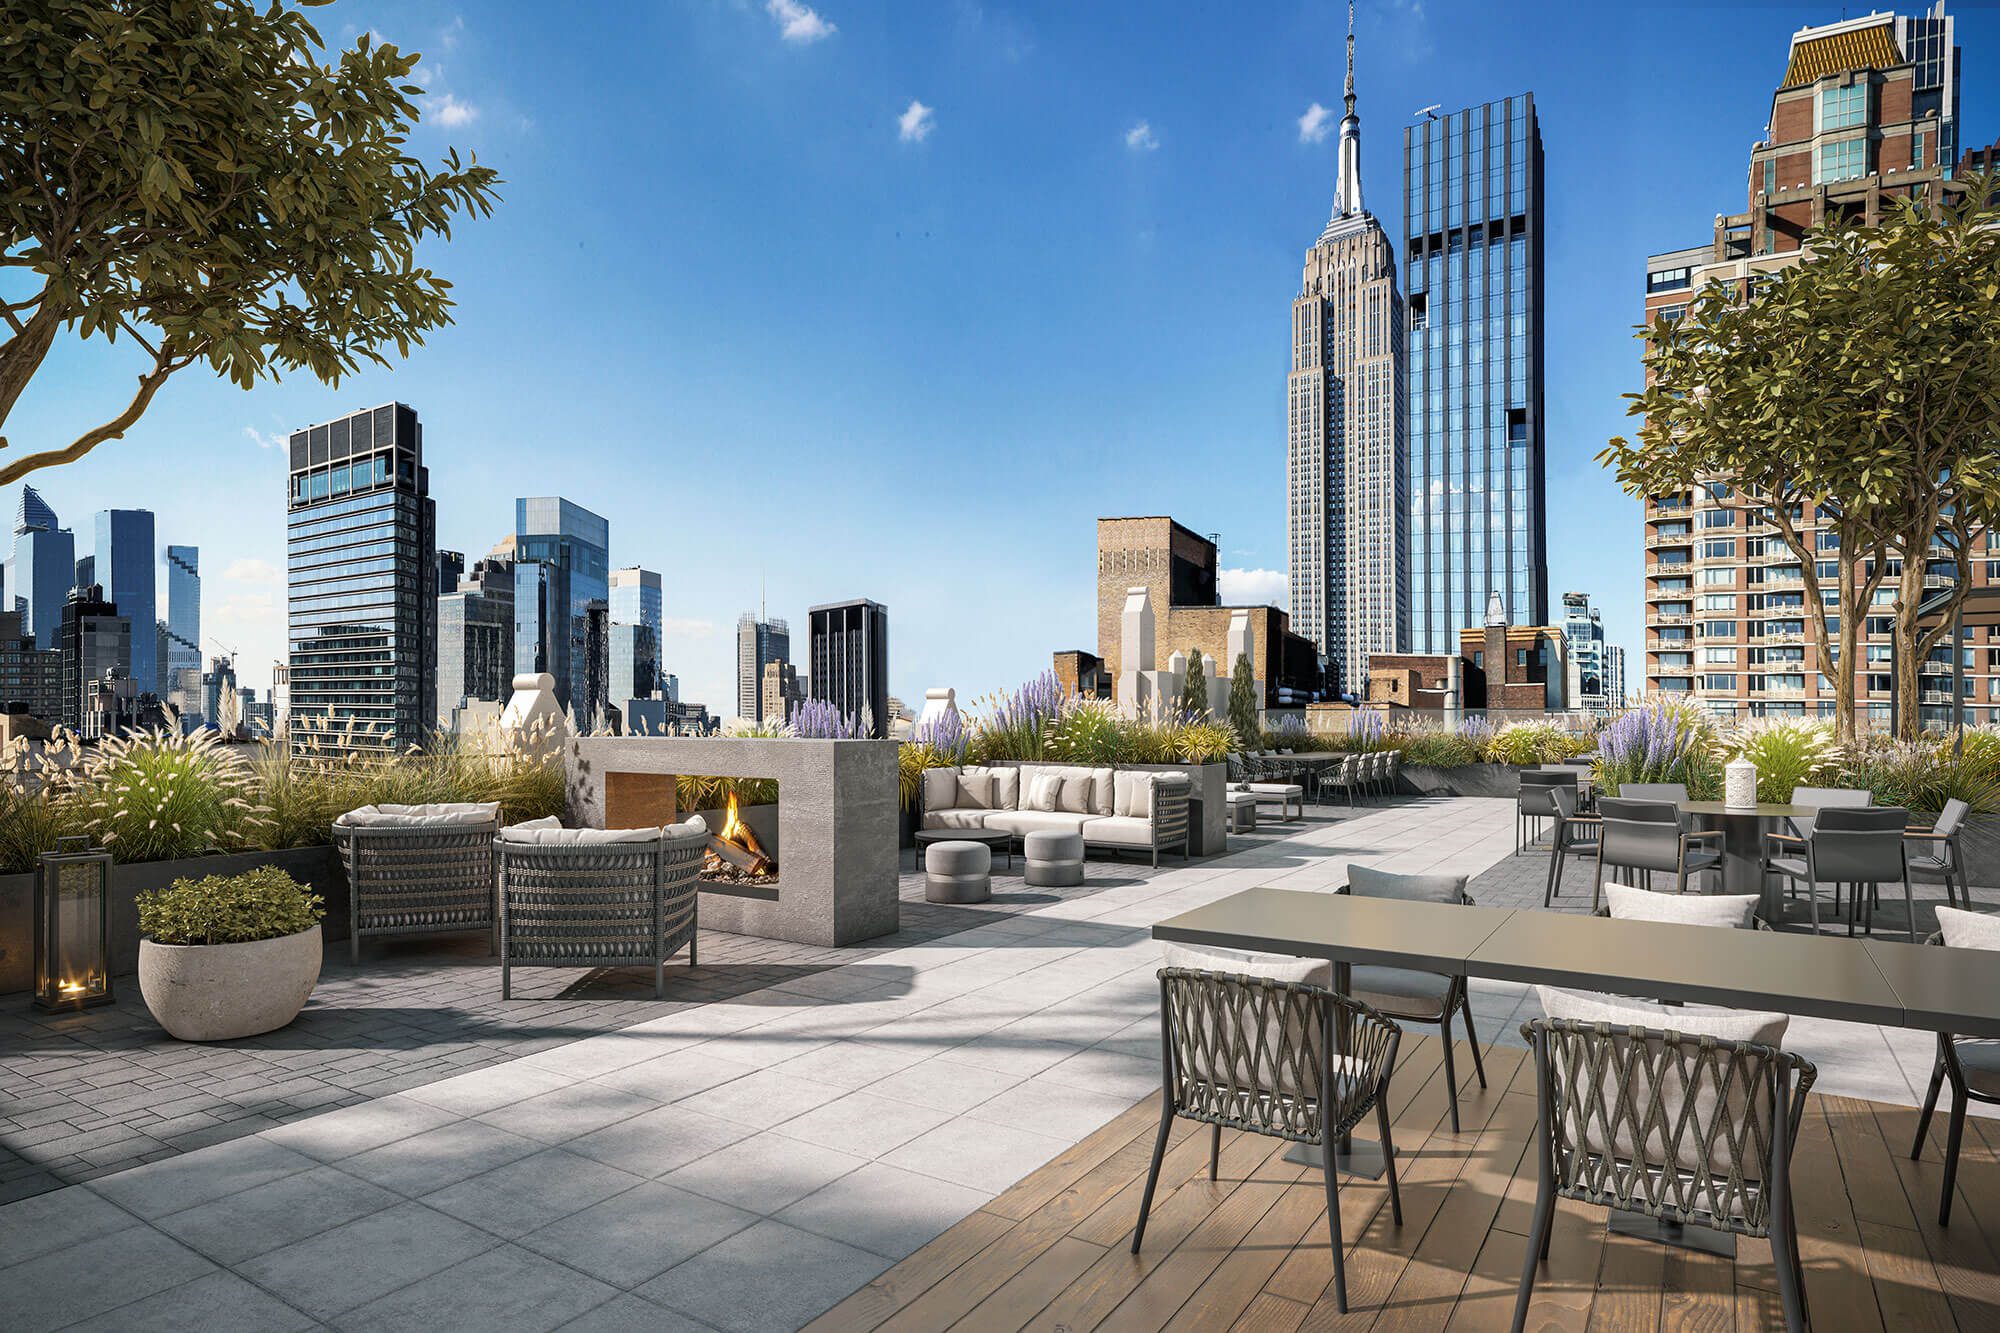 A stunning outdoor luxury lounge with an incredible view of NYC